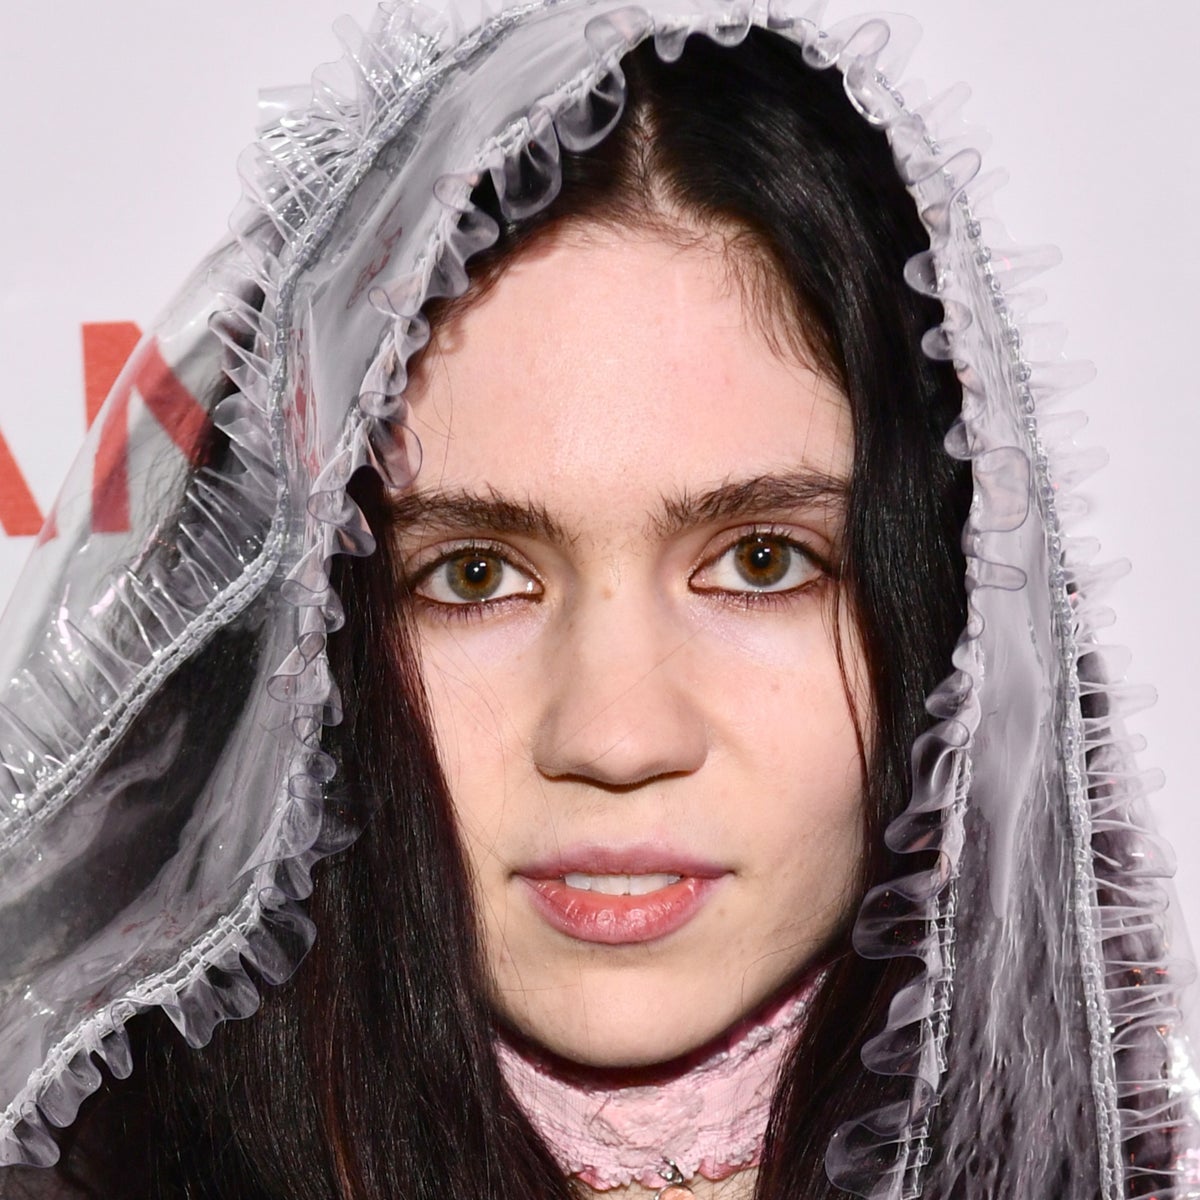 Grimes teases collaboration with The Weeknd, says she wants to change main  day job after BOOK 1